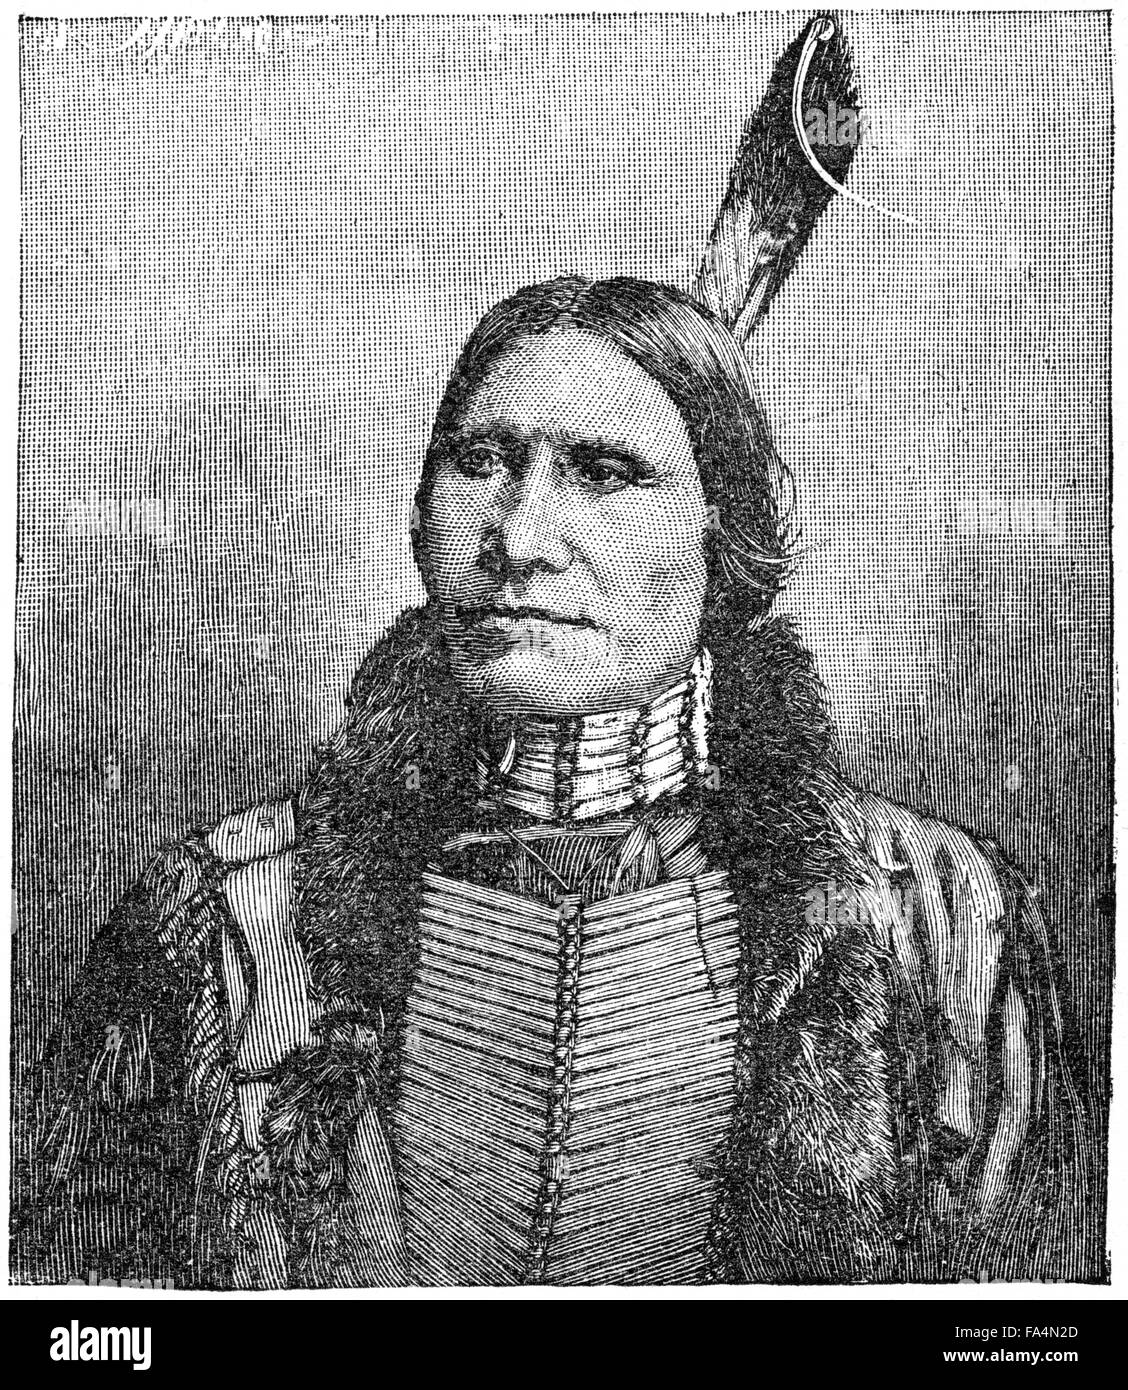 Chief American Horse (1840-1908), Oglala Lakota Chief, Book Illustration from “Indian Horrors or Massacres of the Red Men”, by Henry Davenport Northrop, 1891 Stock Photo